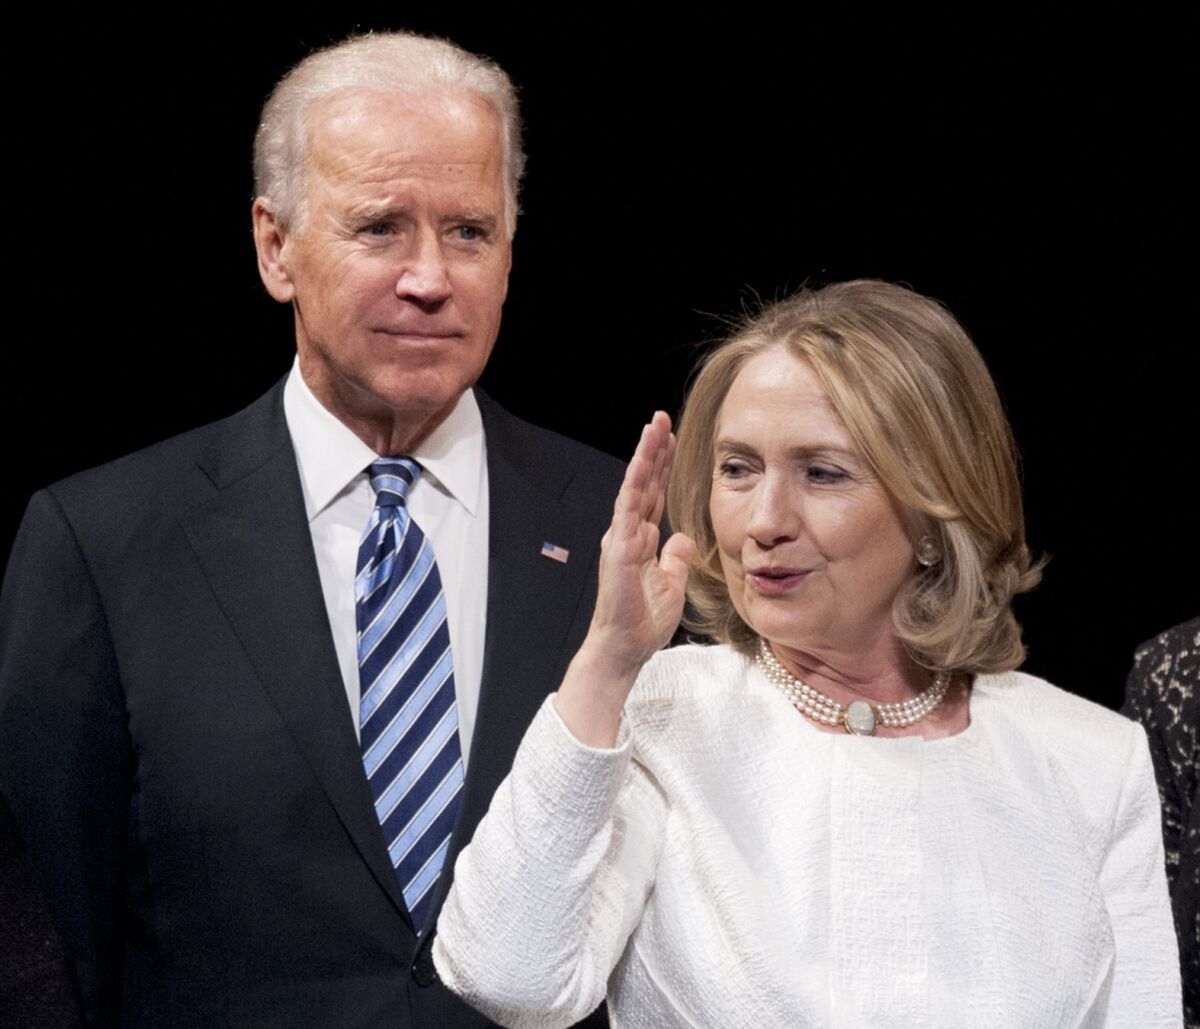 Over the last quarter of a century or so, Hillary Rodham Clinton and Joe Biden, shown above in Washington in 2013, have collaborated and competed, shared more than a dozen staff members, and served in President Obama's Cabinet. Now, their long relationship is being tested as he considers a presidential run.